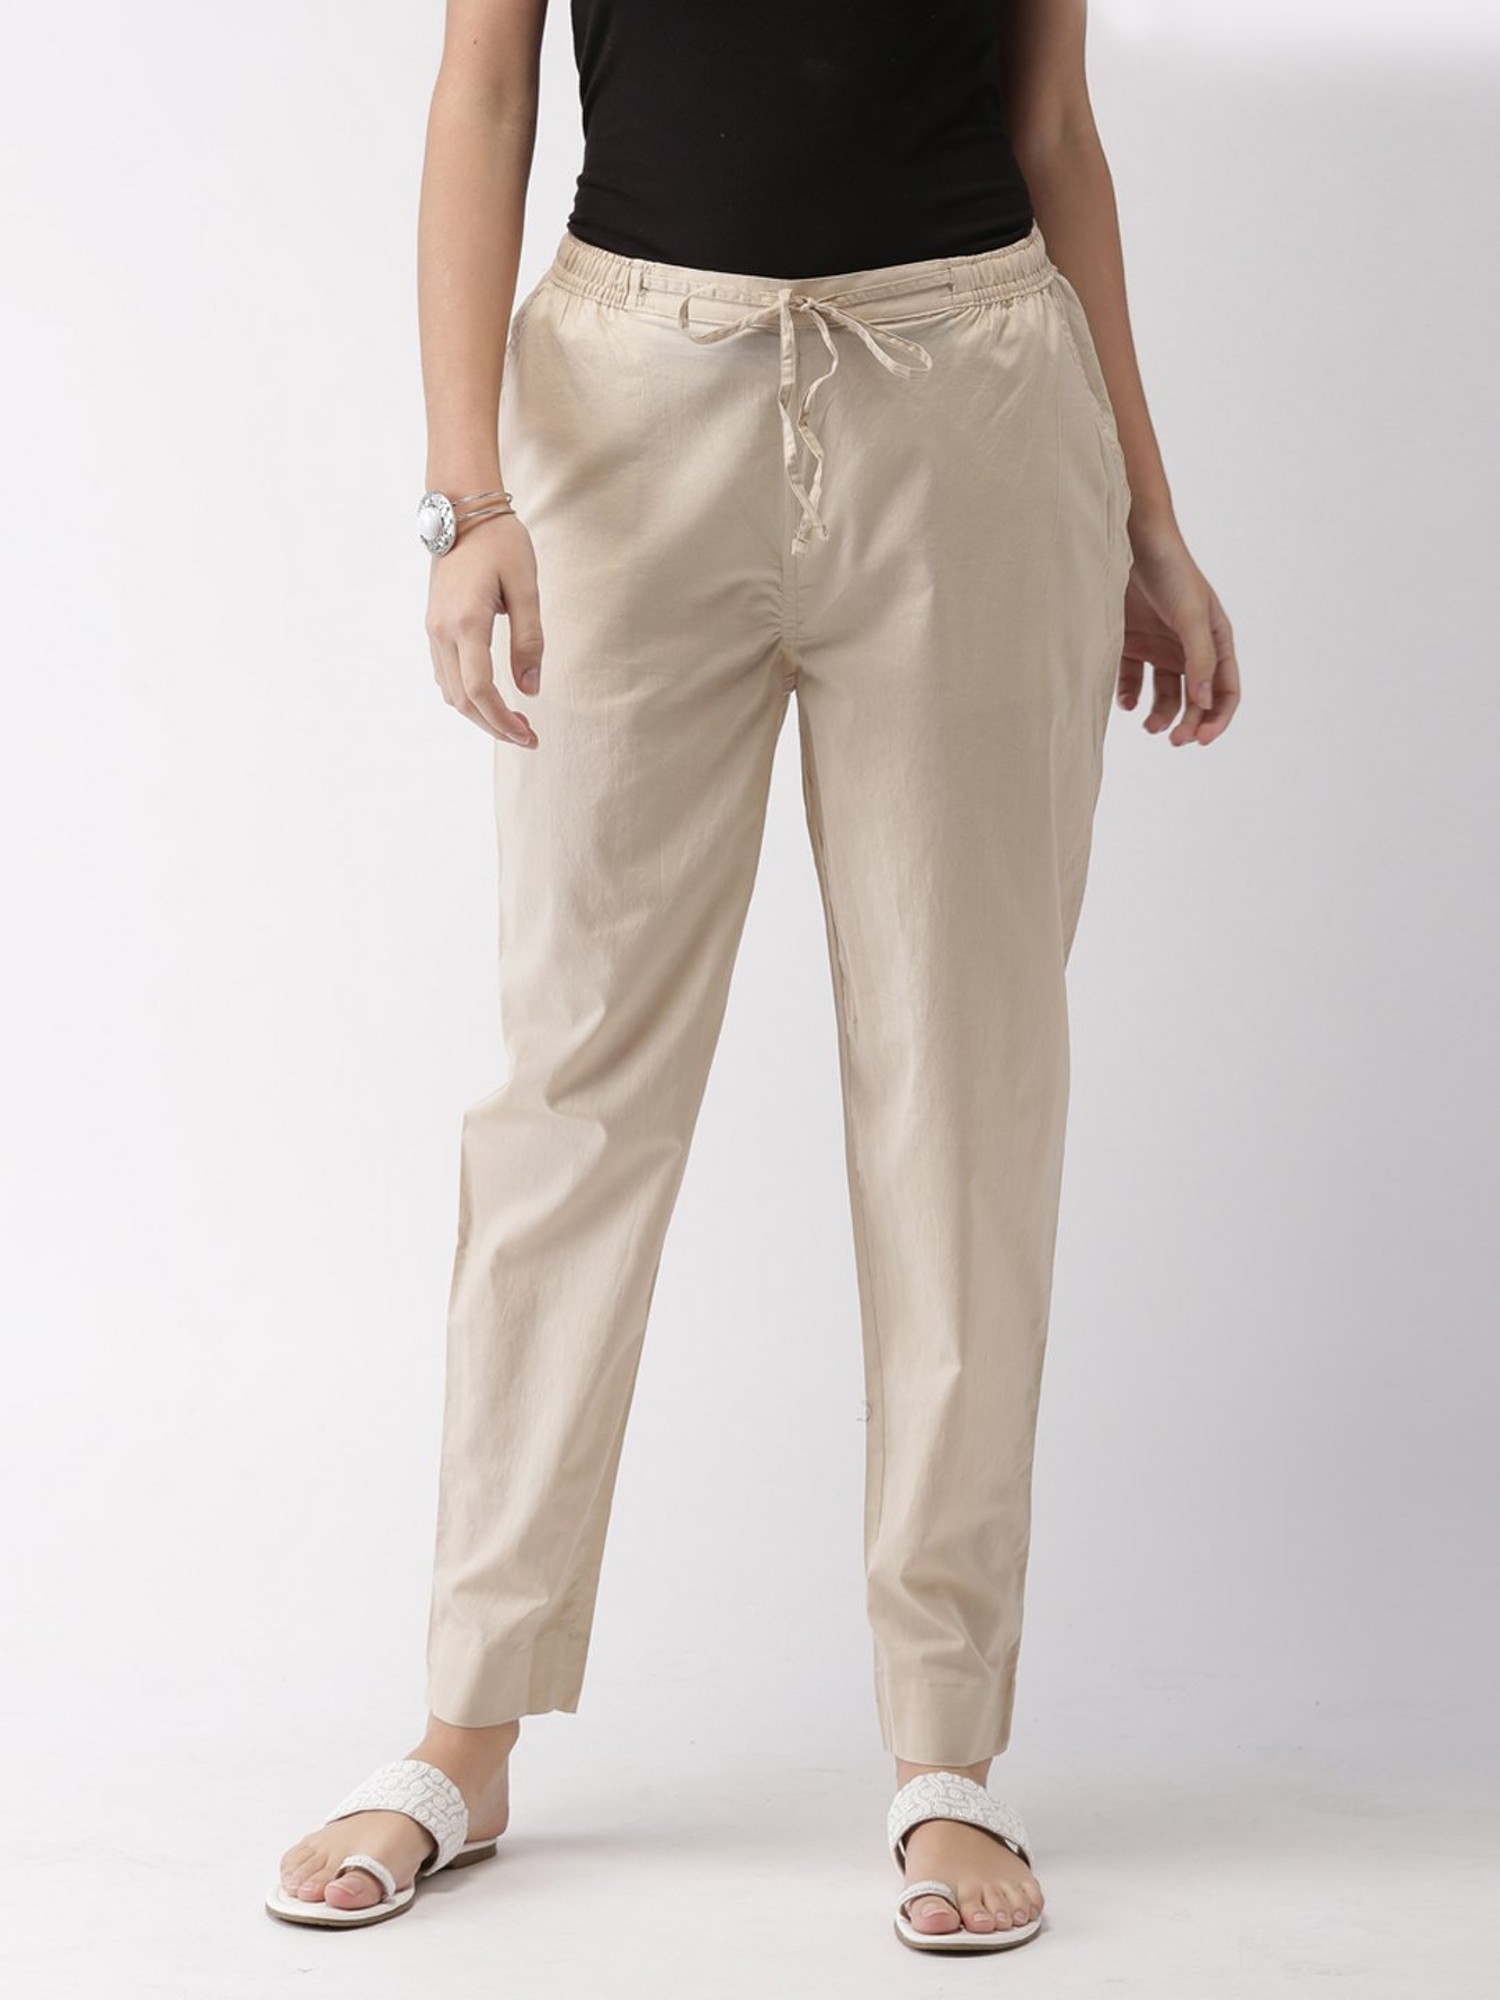 Go Colors Trousers and Pants  Buy Go Colors Women Light Beige Chinos  Trousers Online  Nykaa Fashion